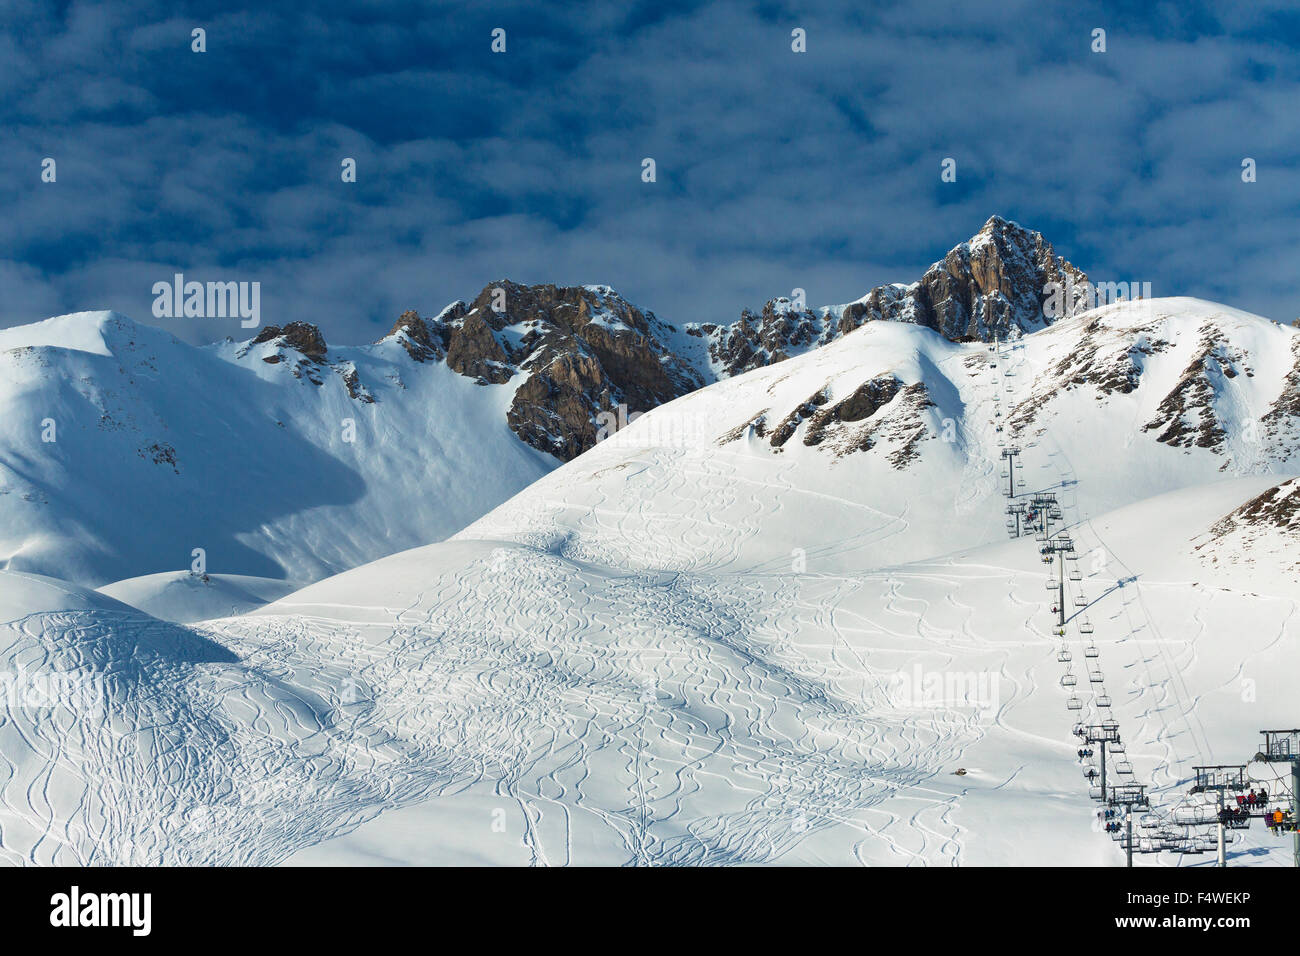 France, Rhône-Alpes, Savoie, Val D'Isere, View of ski lift in snowcapped mountains Stock Photo